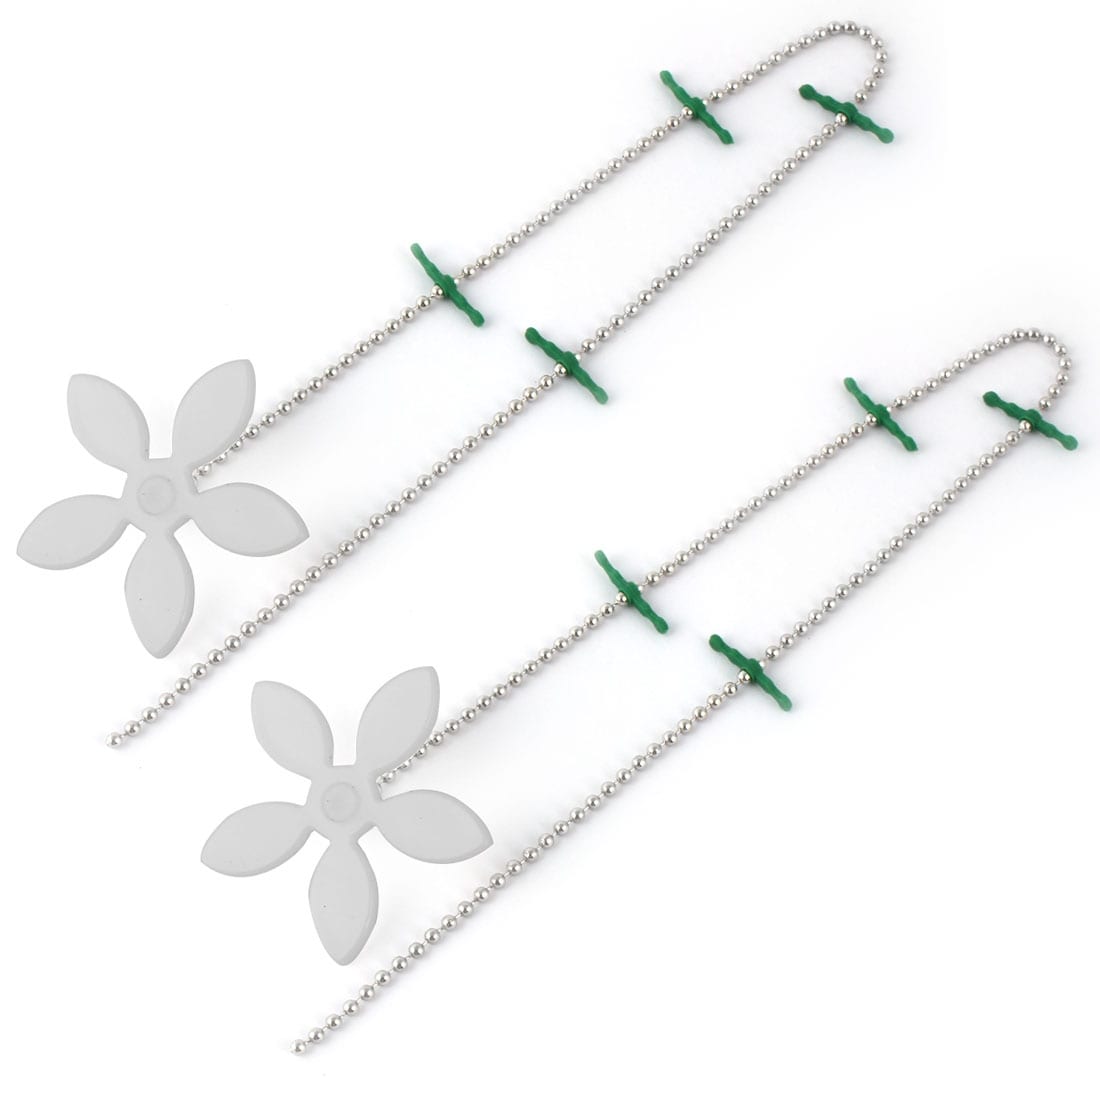 https://ak1.ostkcdn.com/images/products/is/images/direct/f3e75197f5314269256e8241c16b851cb6501783/Flower-Shape-Chain-Drain-Plunger-Hair-Clog-Remover-Catcher-Cleaning-Tool-2pcs.jpg